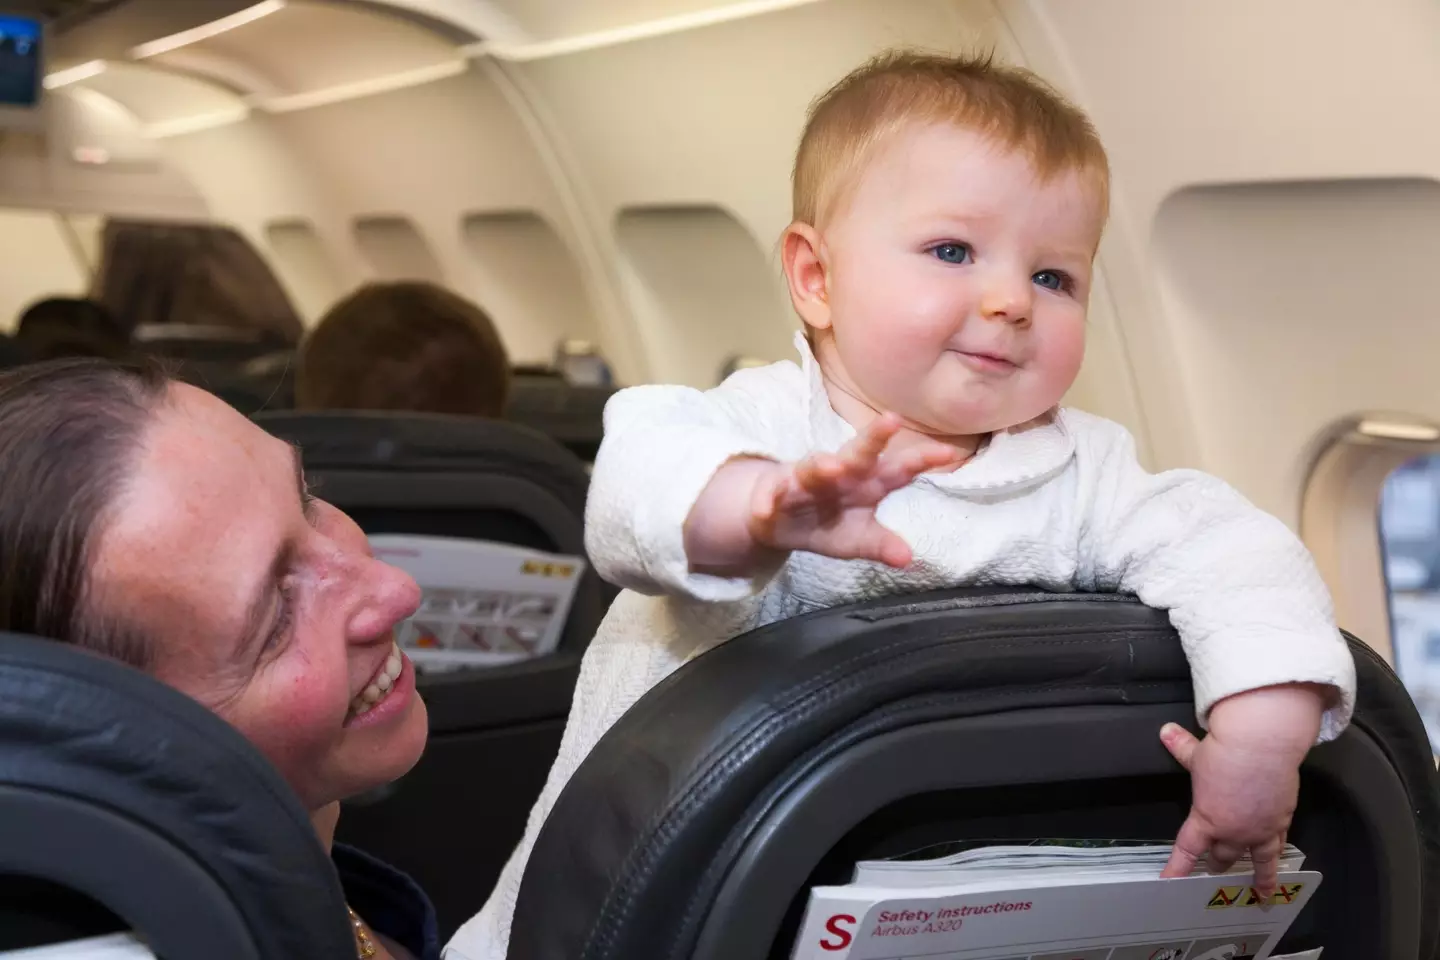 The woman has tickets with her toddler in economy, while her husband has business class tickets through his work.